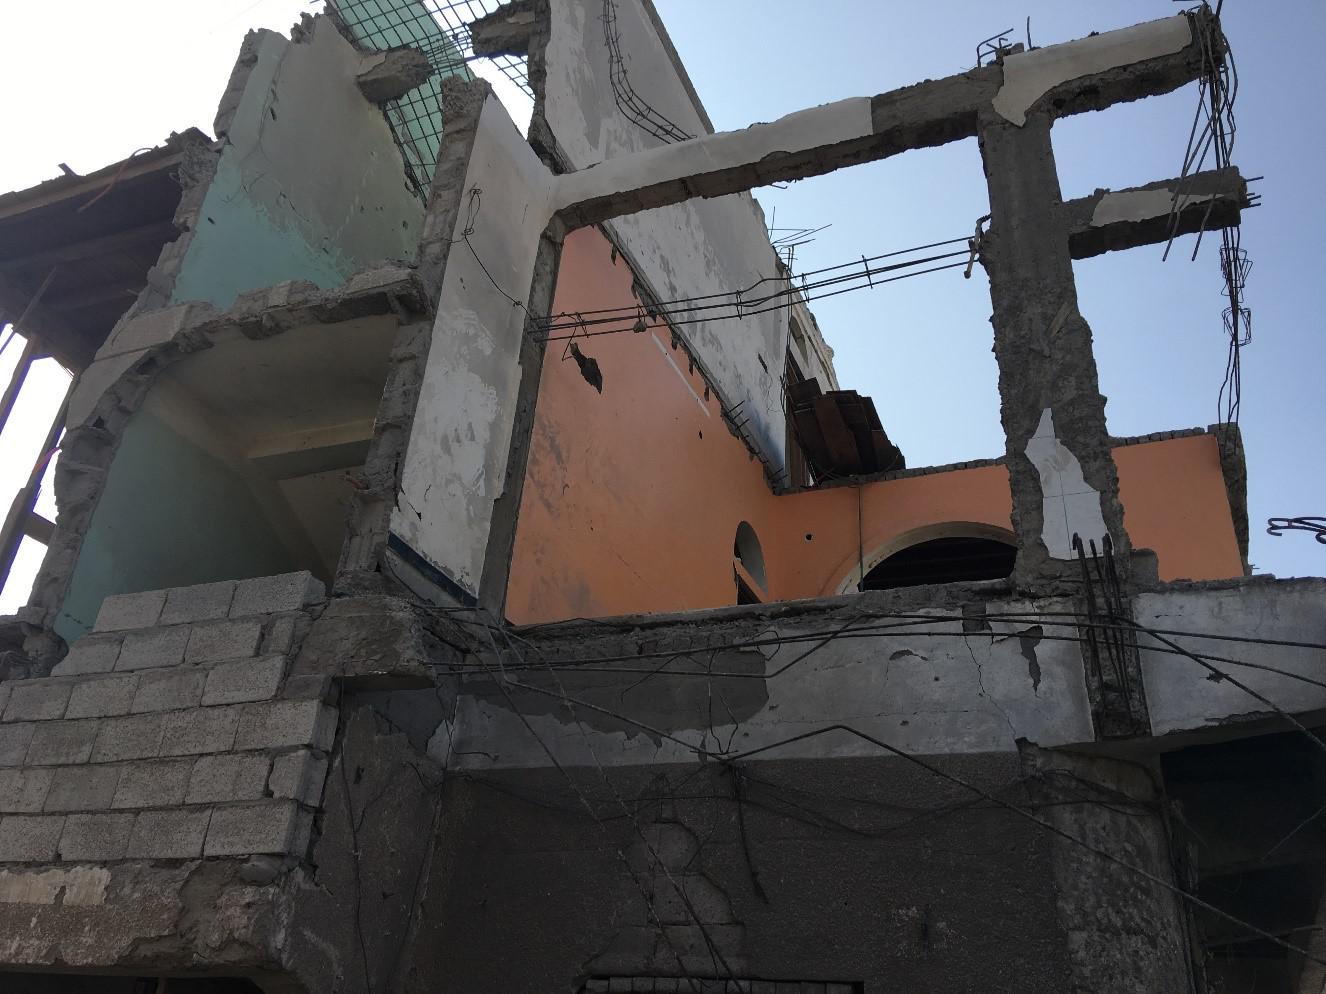 A three-story house in Souq al-Hinood, a crowded residential area in Hodeida city, that was hit by an airstrike on the evening of September 21, 2016. A single bomb killed at least 28 civilians, including 8 children.